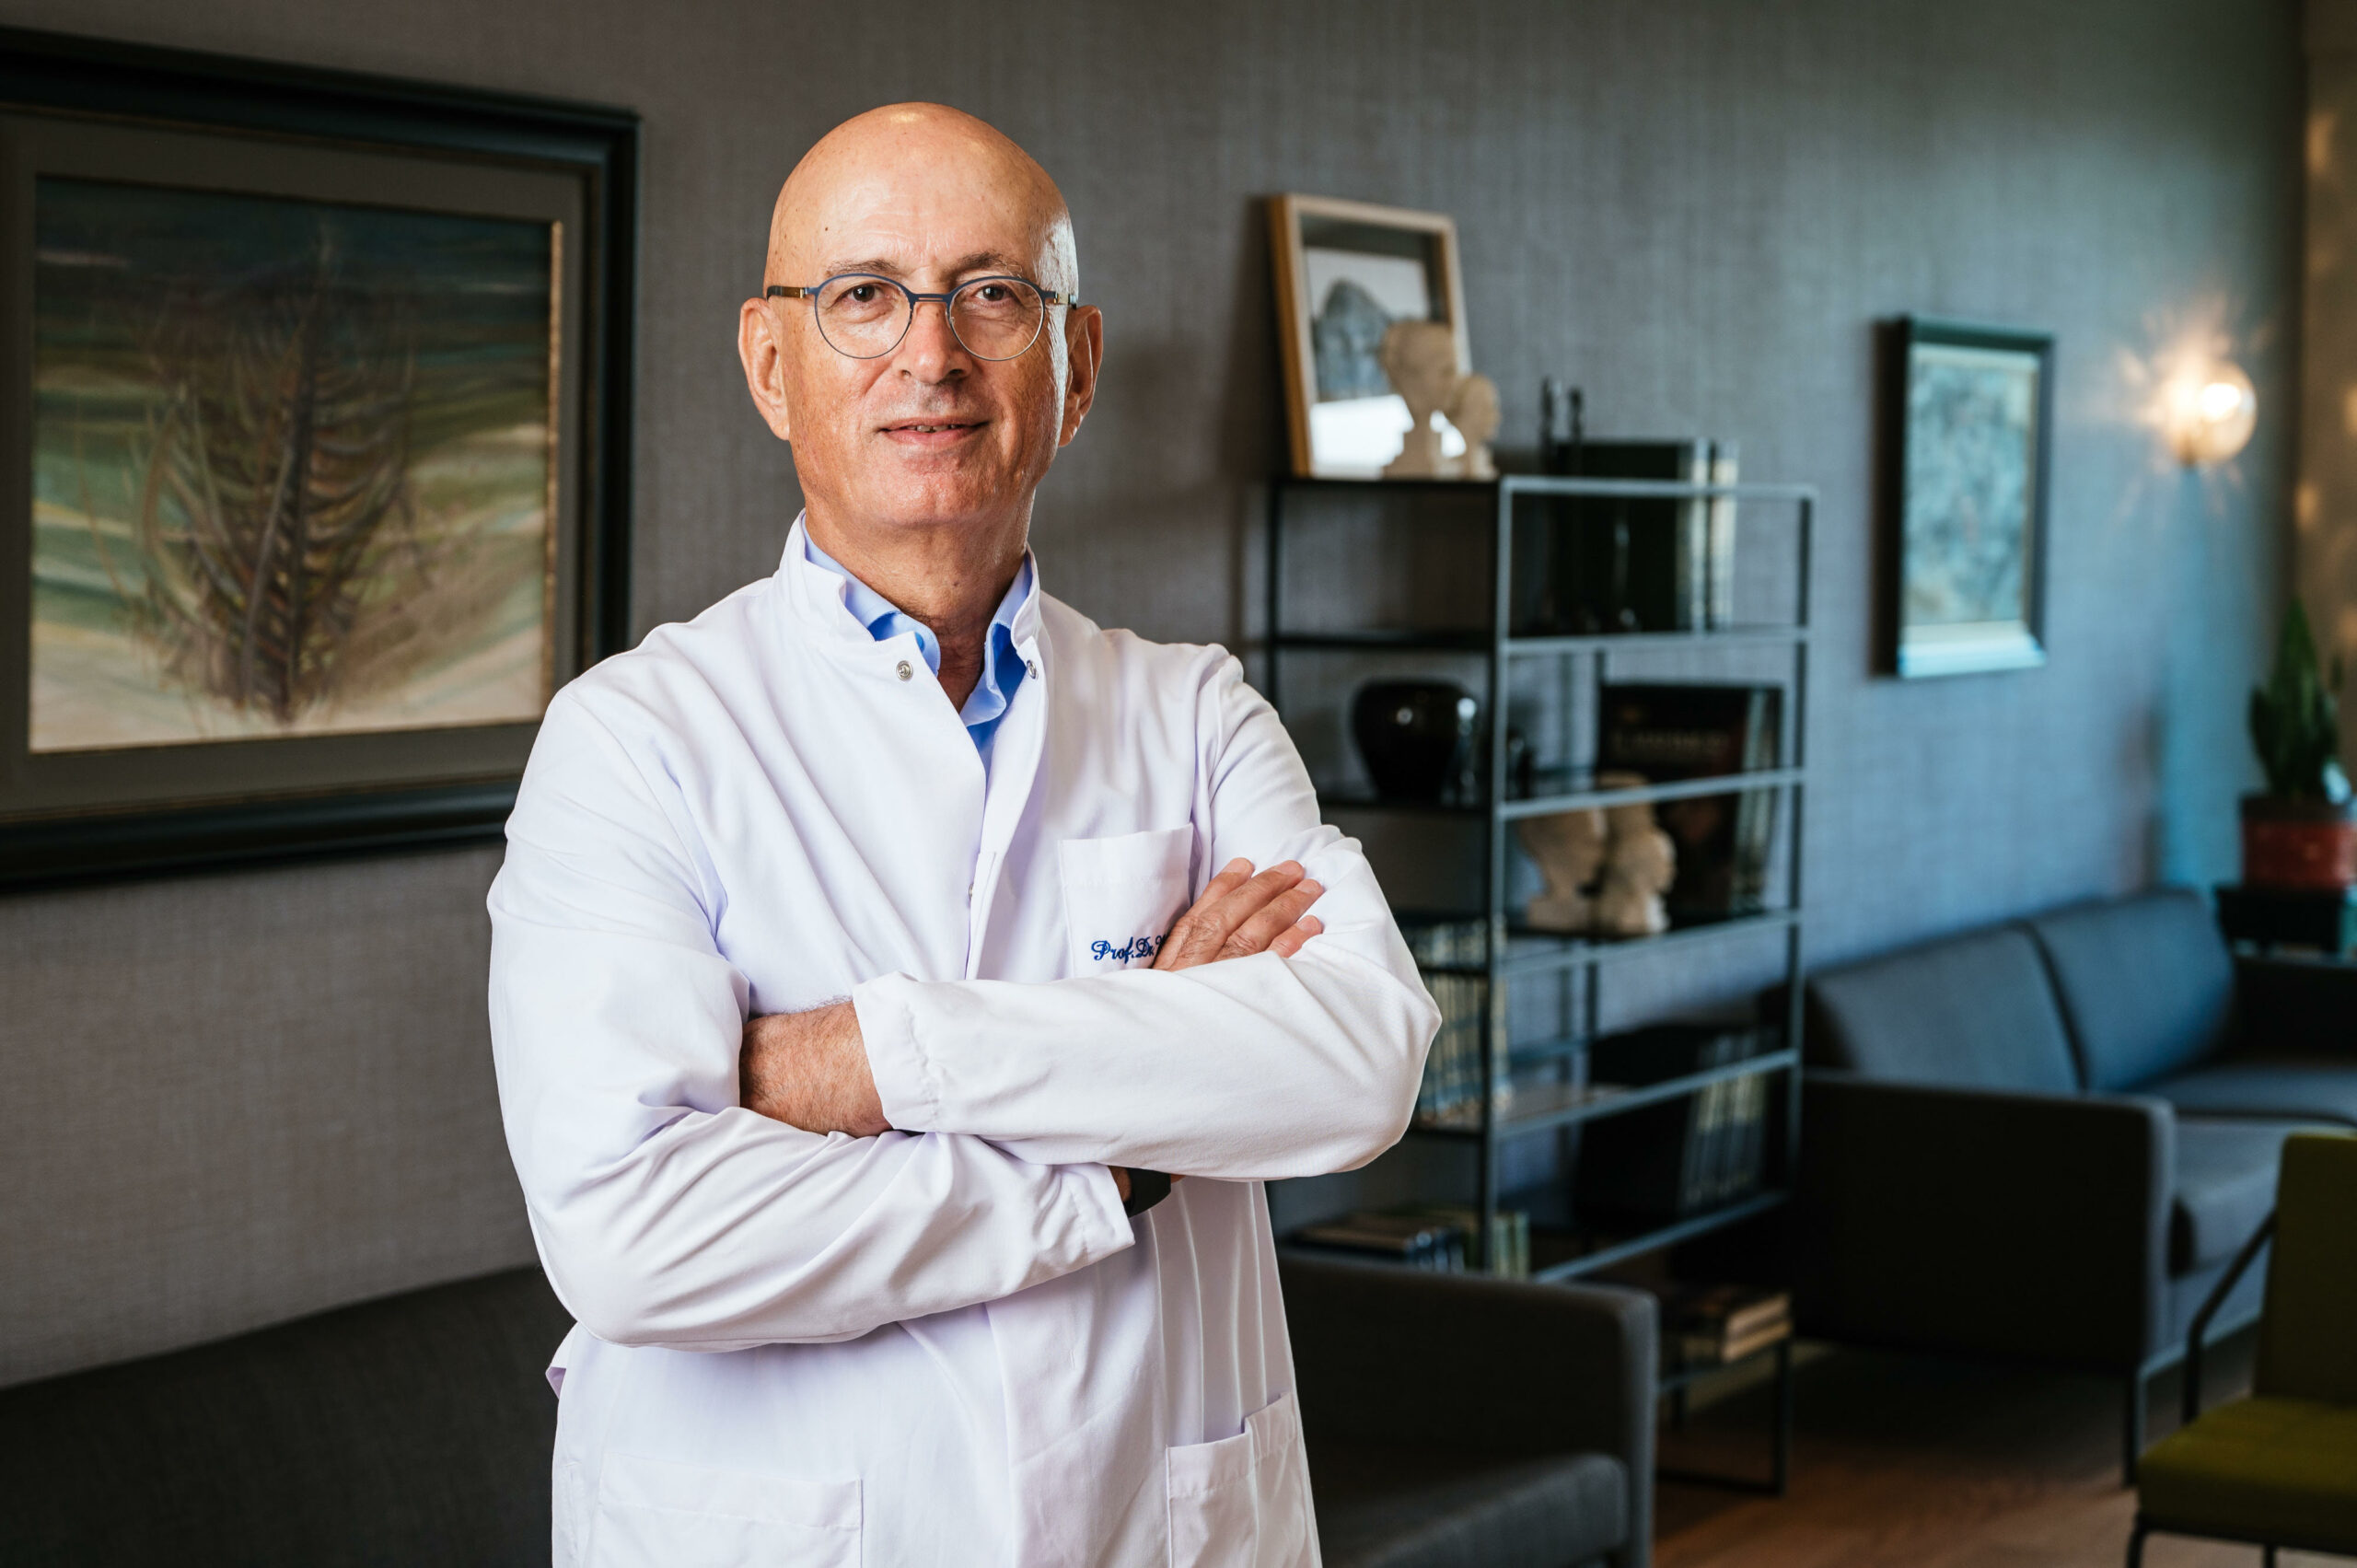 Pioneering Spinal Health with Prof. Dr. Yunus Aydın’s Microdiscectomy and Spinal Canal Stenosis Surgery